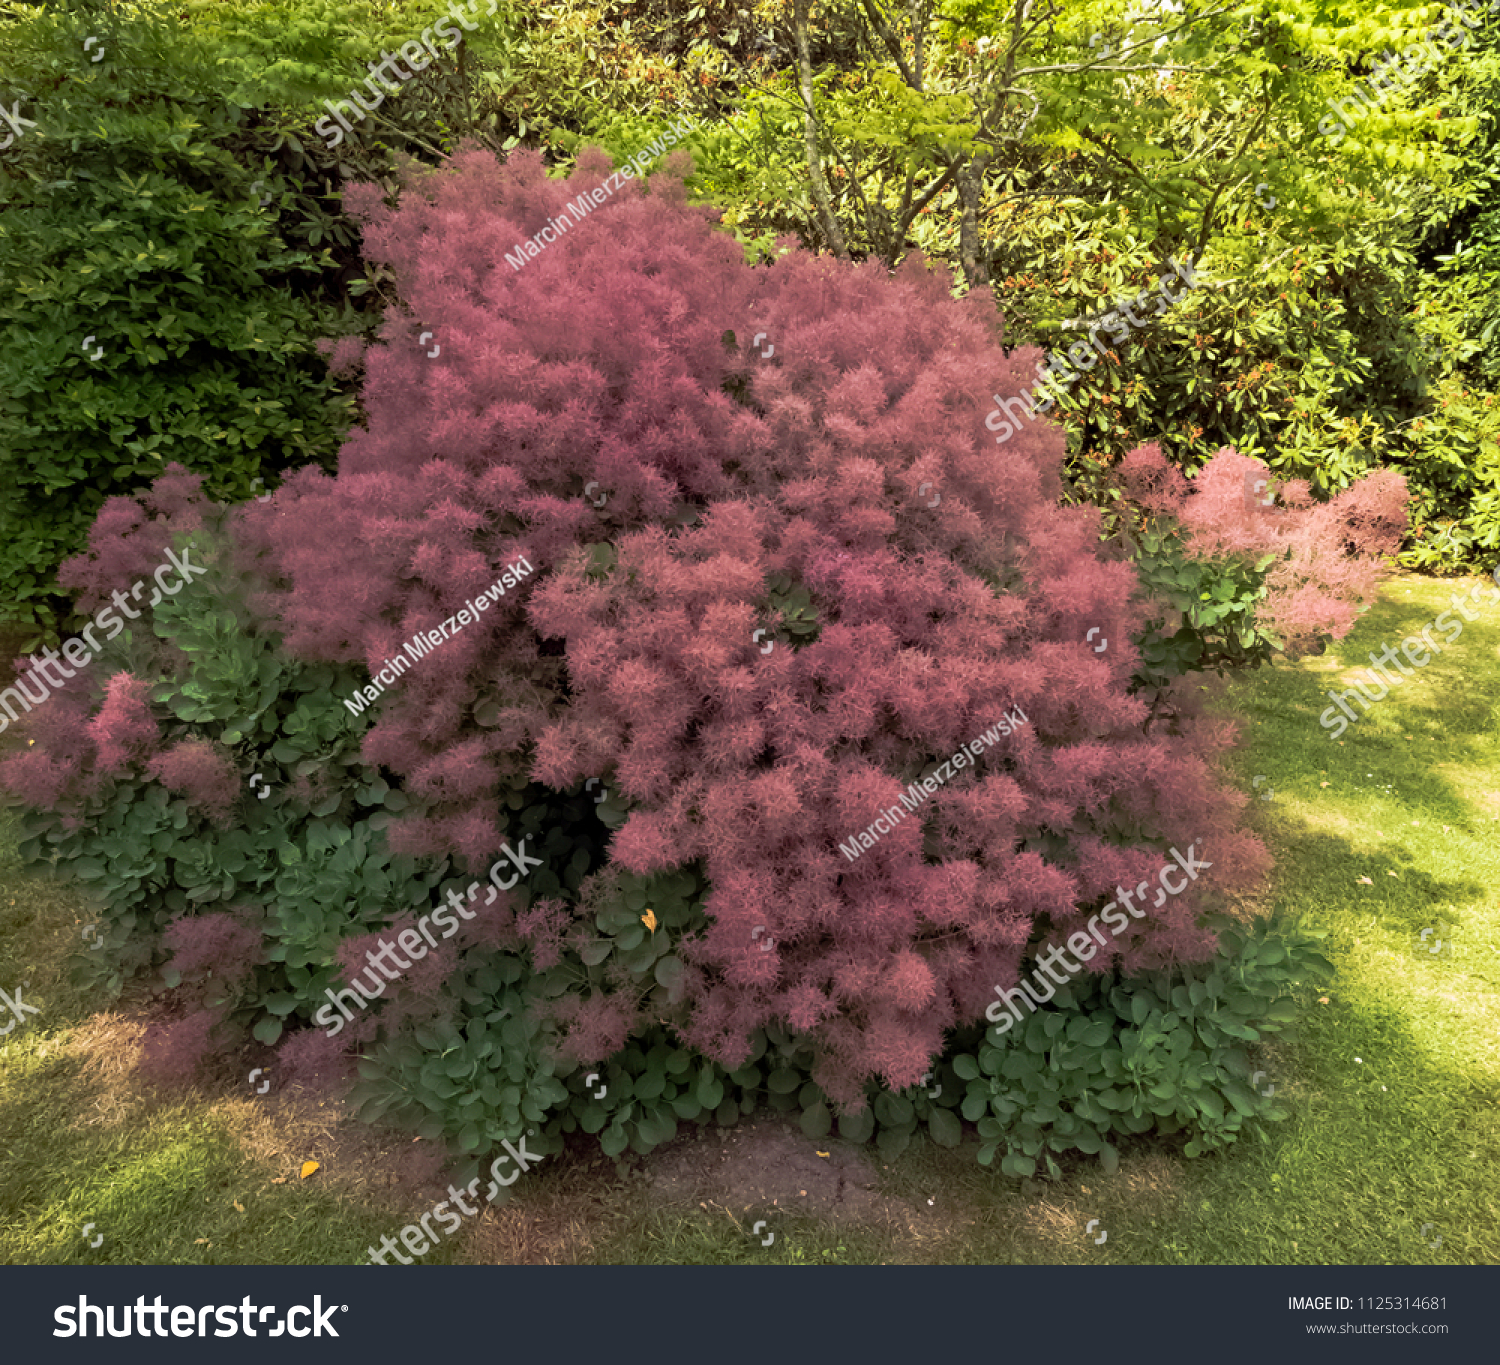 European smoketree (cotinus coggygria) known as rhus cotinus, Eurasian smoketree, smoke tree, smoke bush, or dyer's sumach is a species of flowering plant - Uckfield, United Kingdom #1125314681